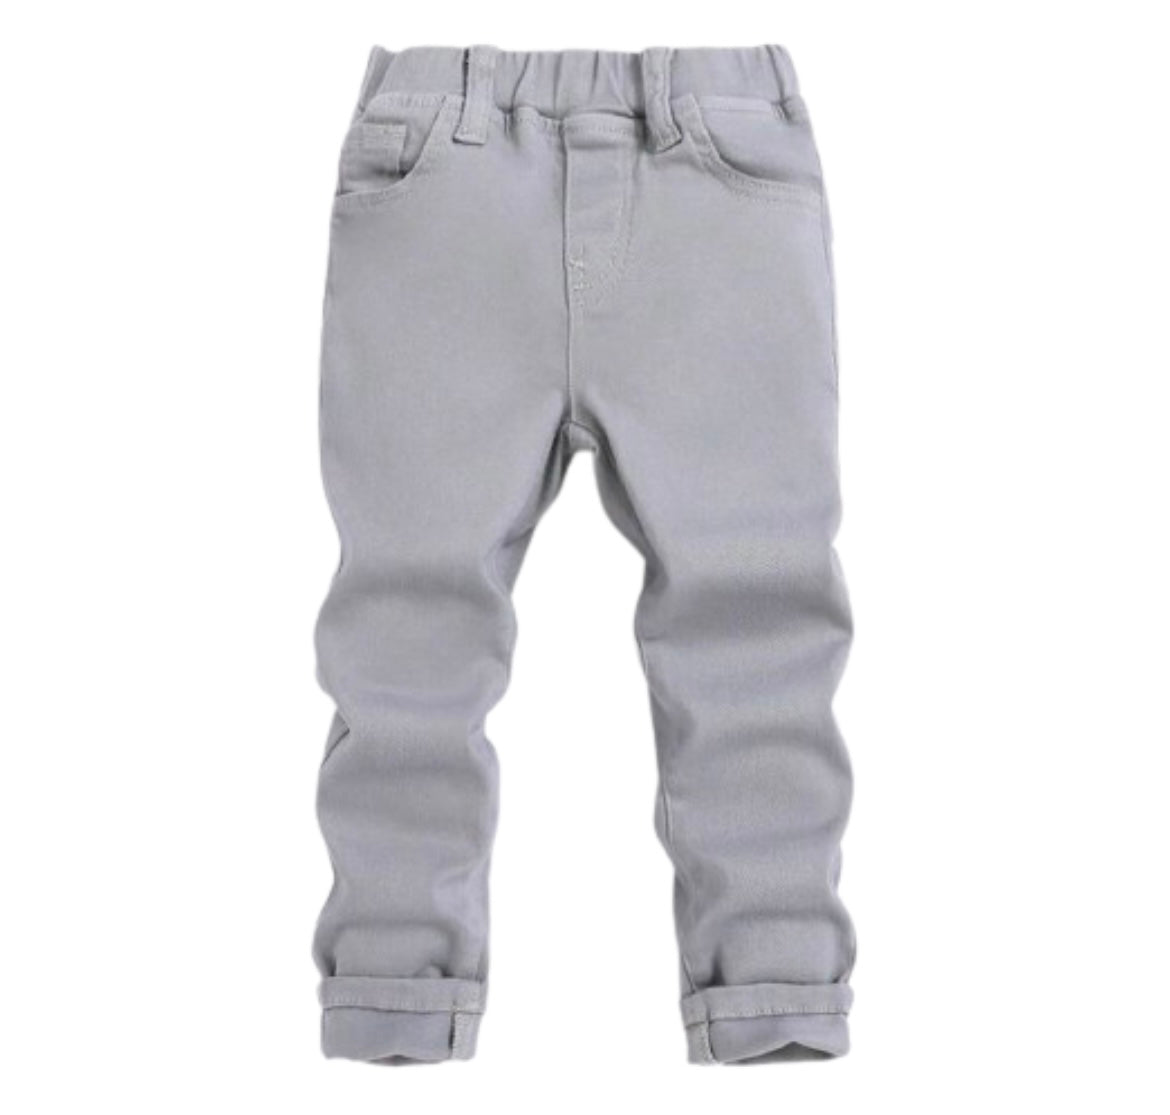 PEWTER GRAY JEANS